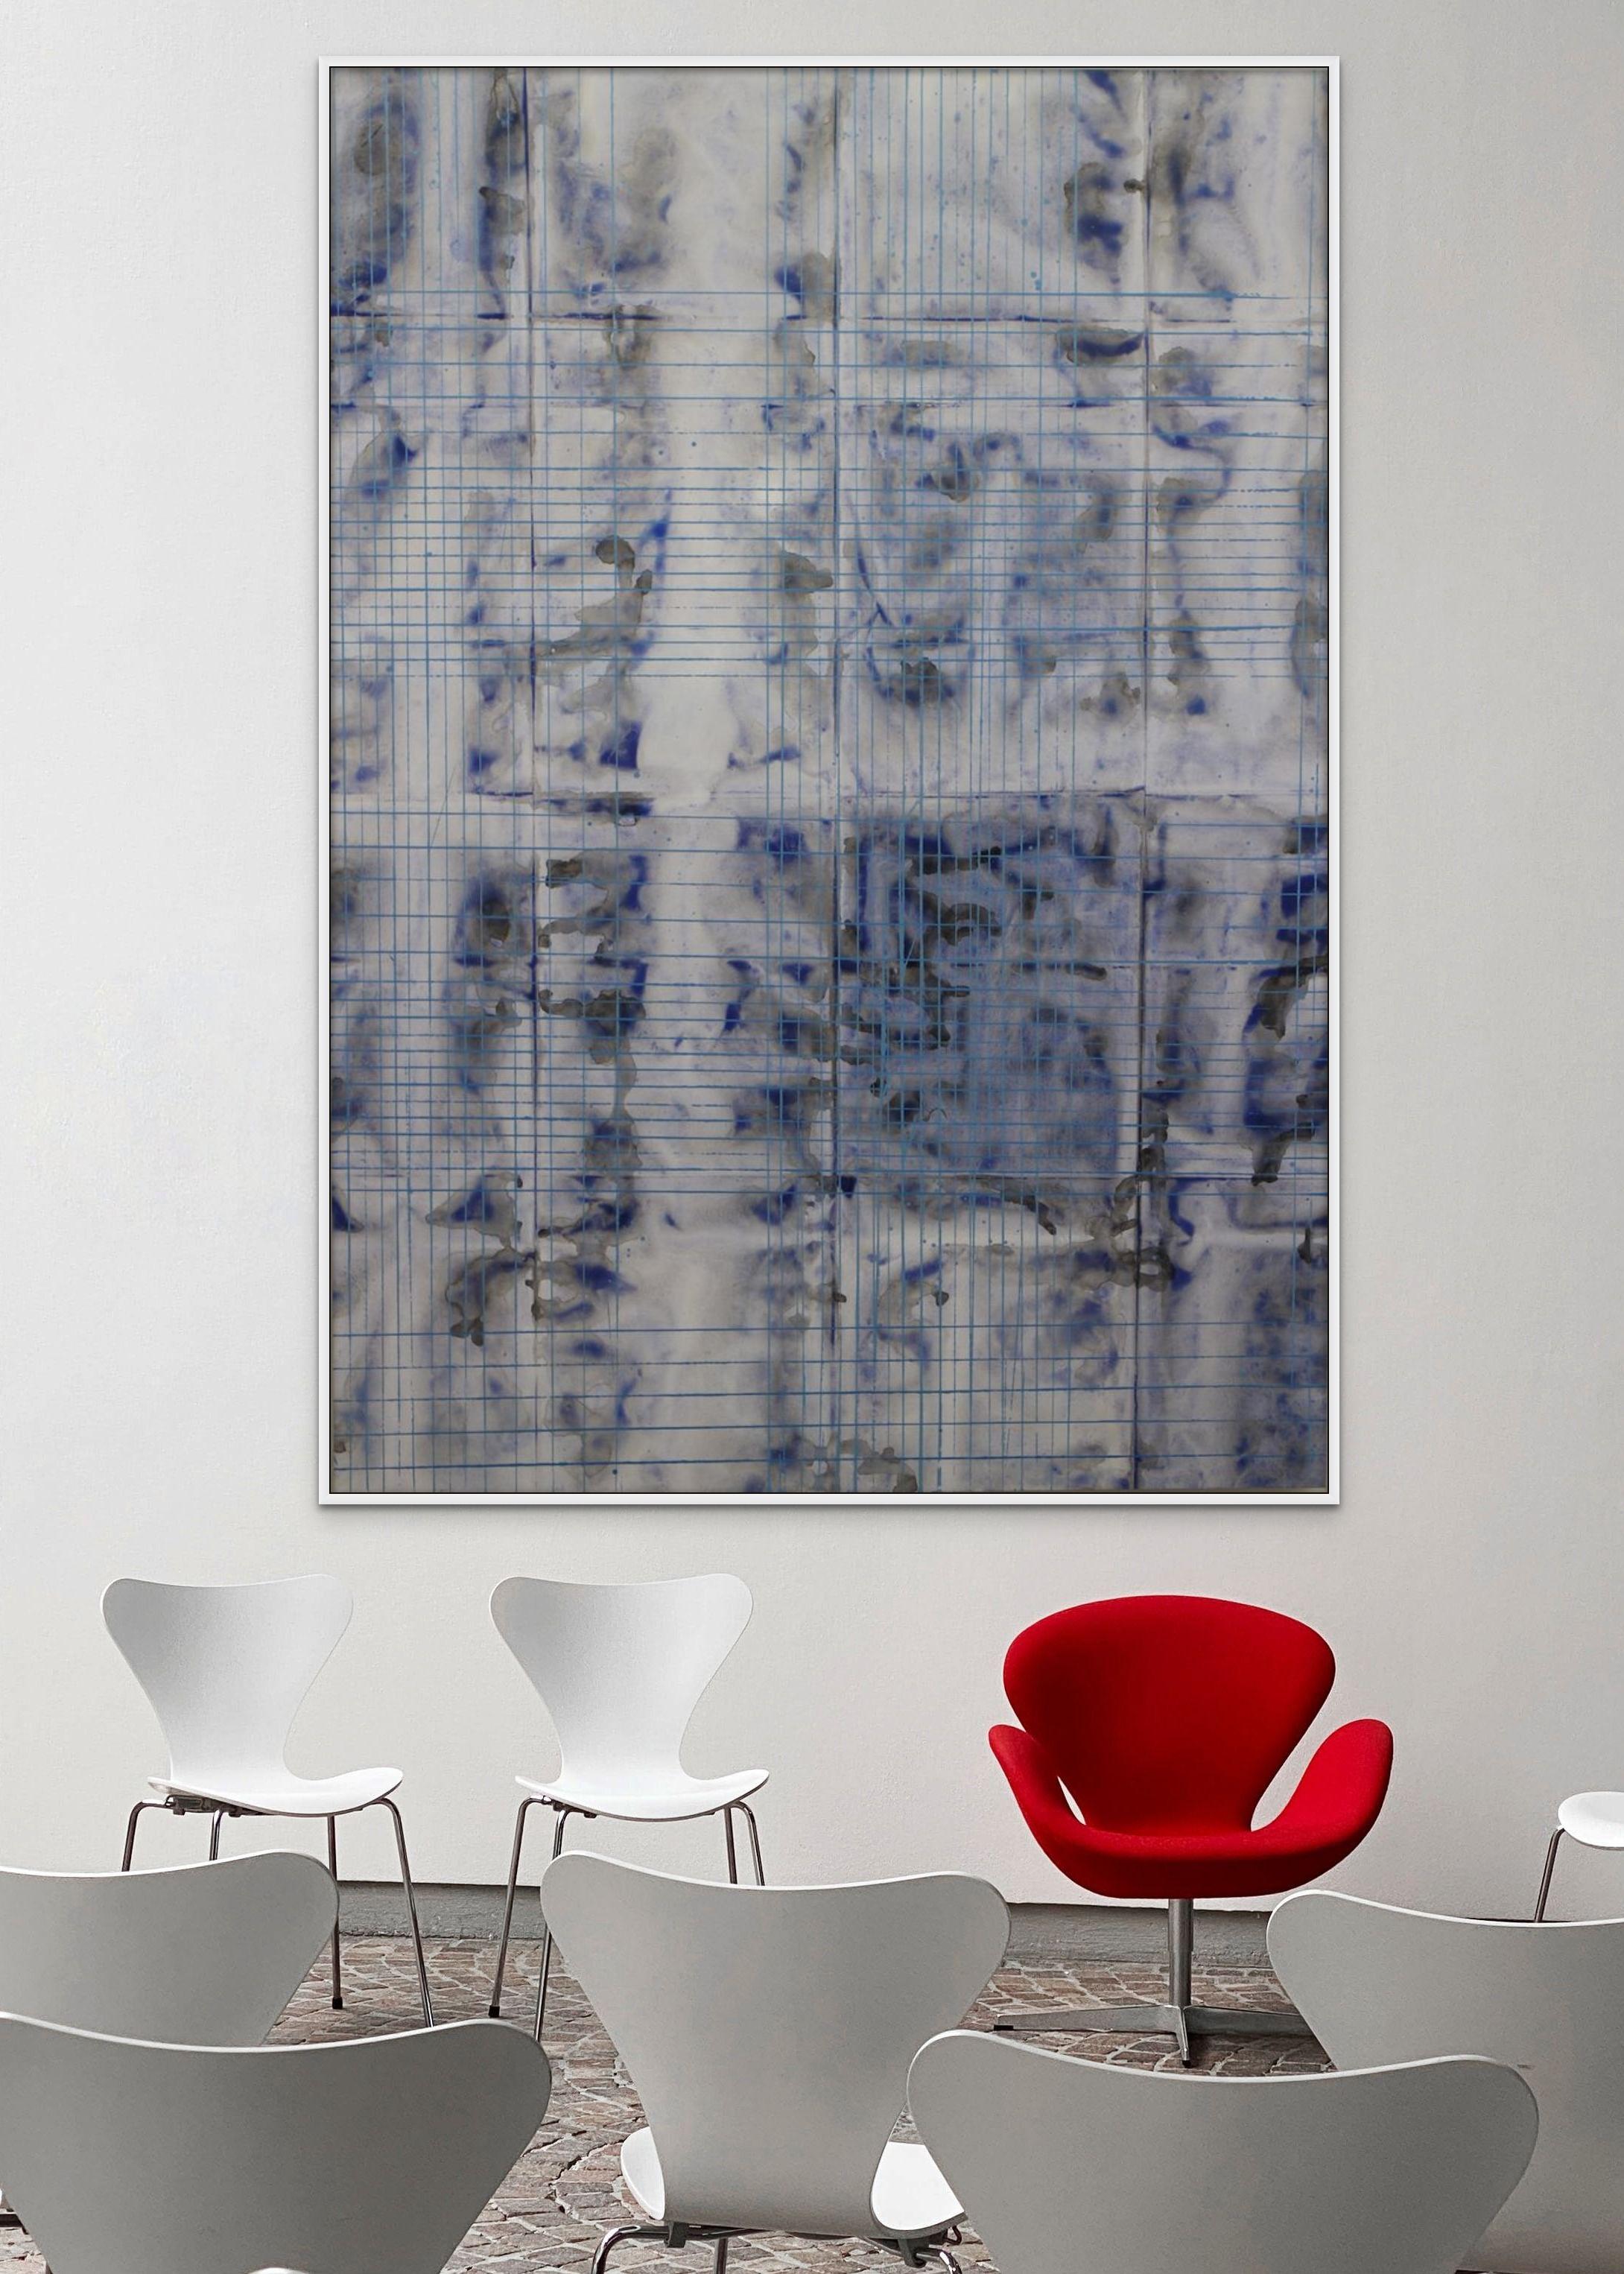 Large Size artwork with acrylic paint and enamel on canvas. Framing options included in Black, White and Natural wood framing. Please contact seller for the same.

BIO
Jean Wolff is a New York City-based abstract painter and printmaker. Her